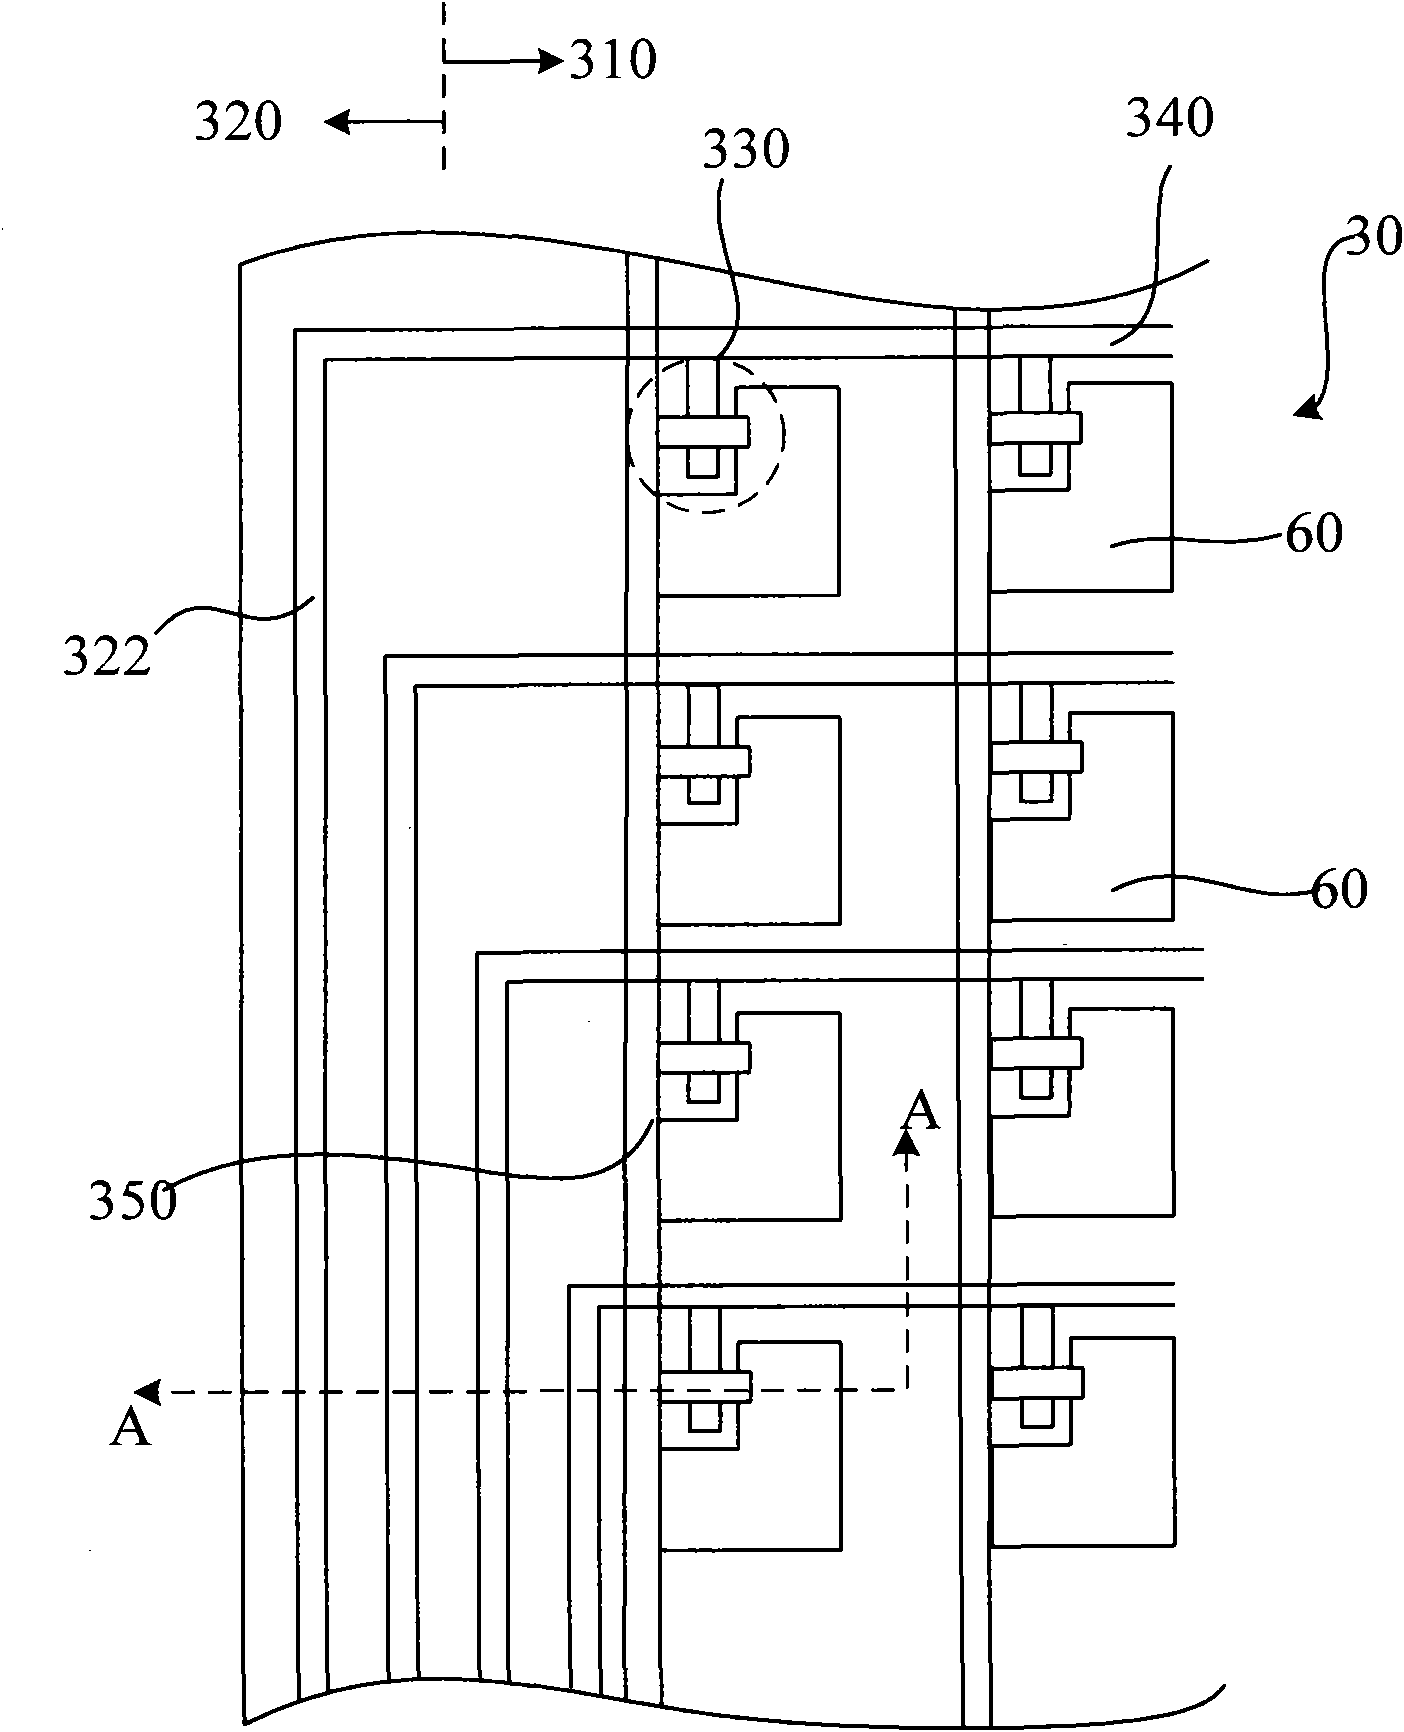 Array substrate, fabricating method for same and liquid crystal display panel